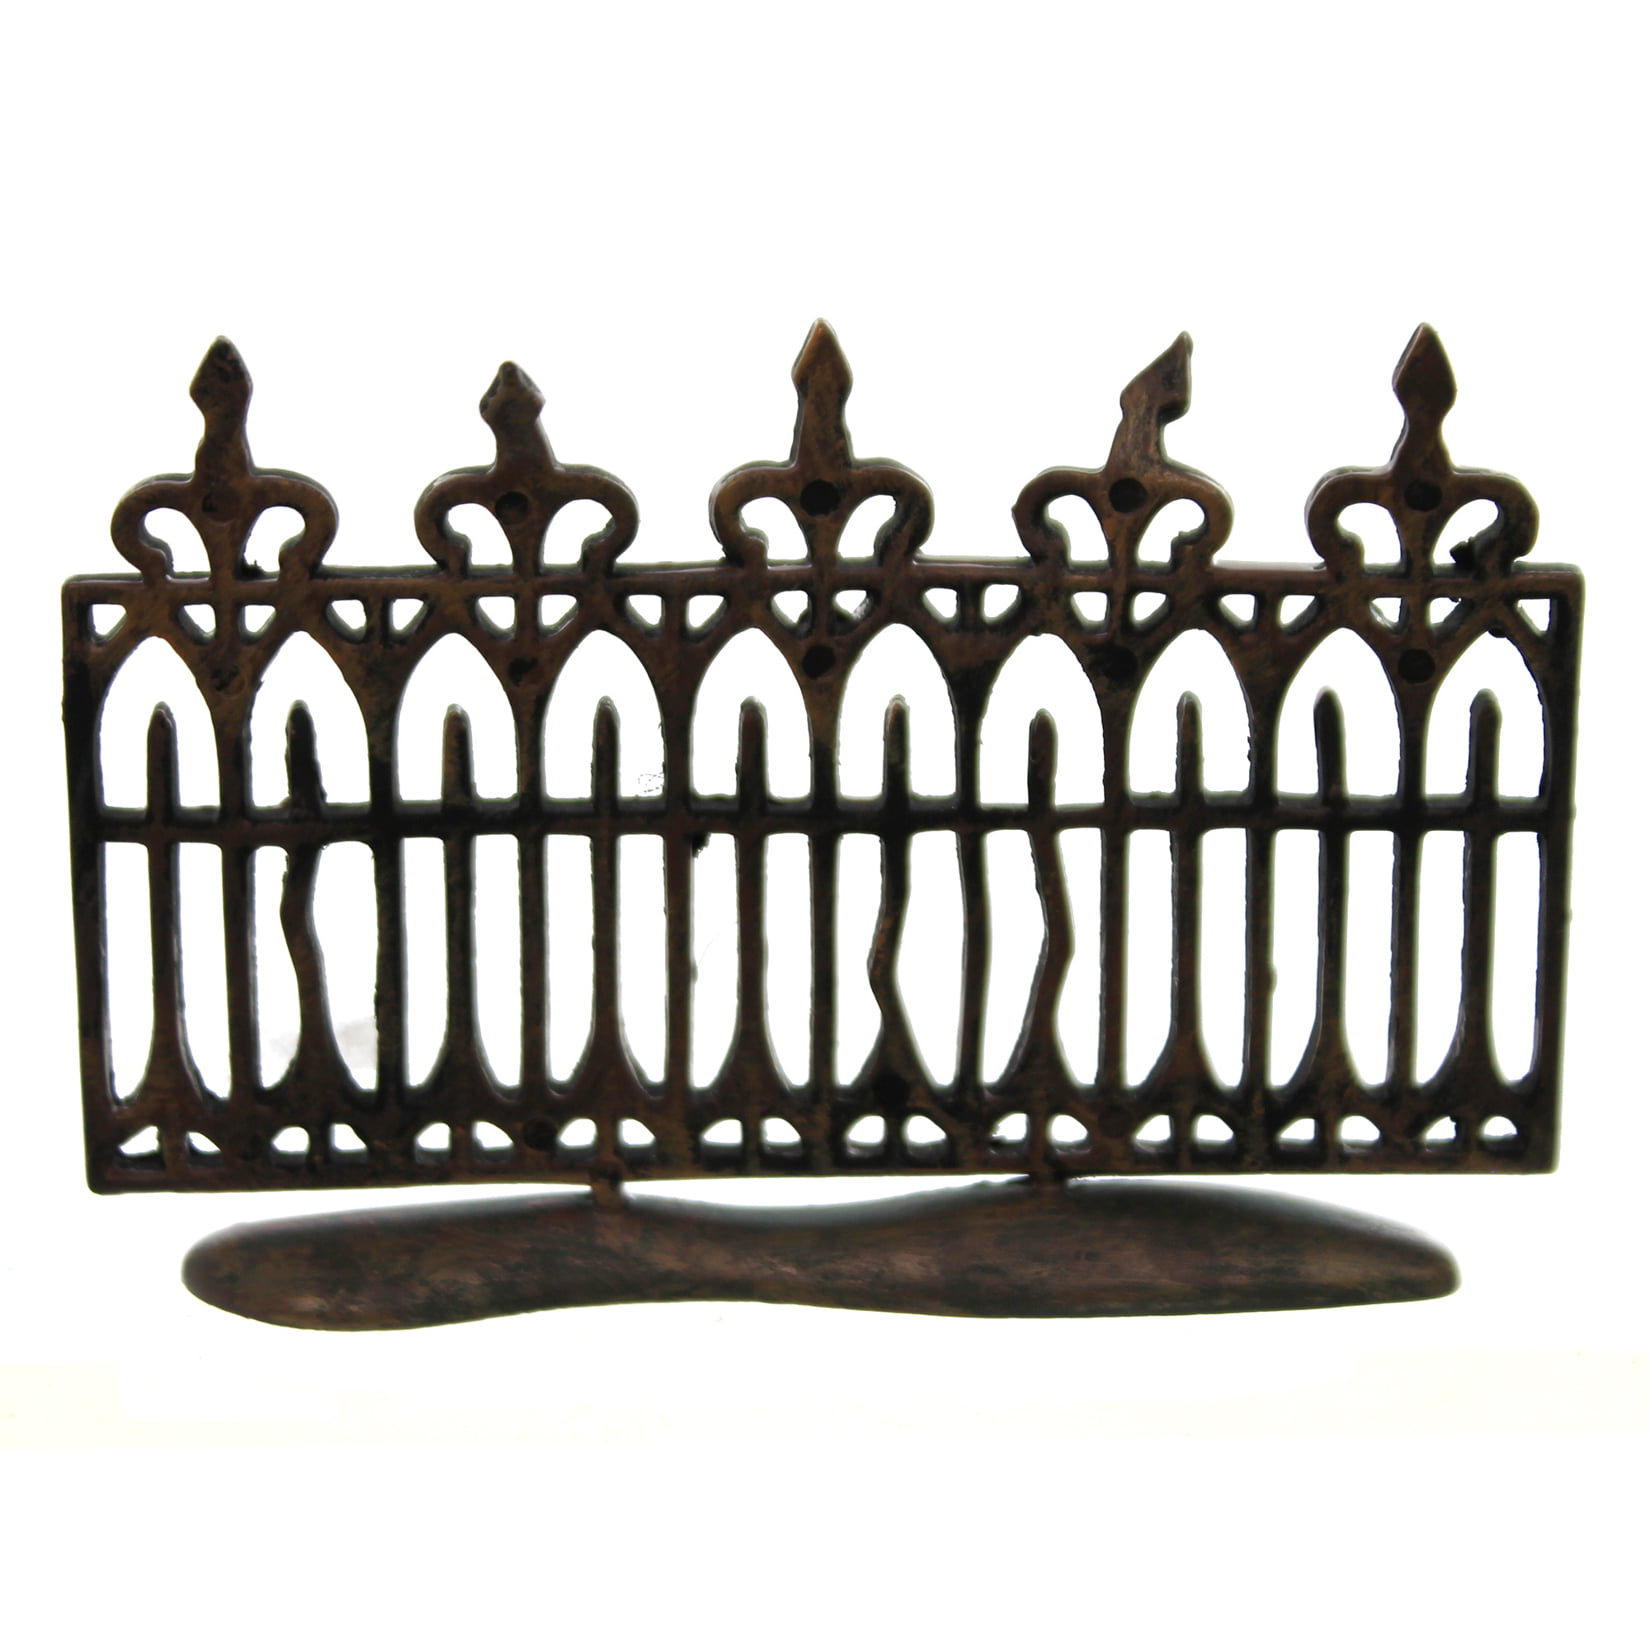 Department 56 Spooky Wrought Iron Fence Set of 6